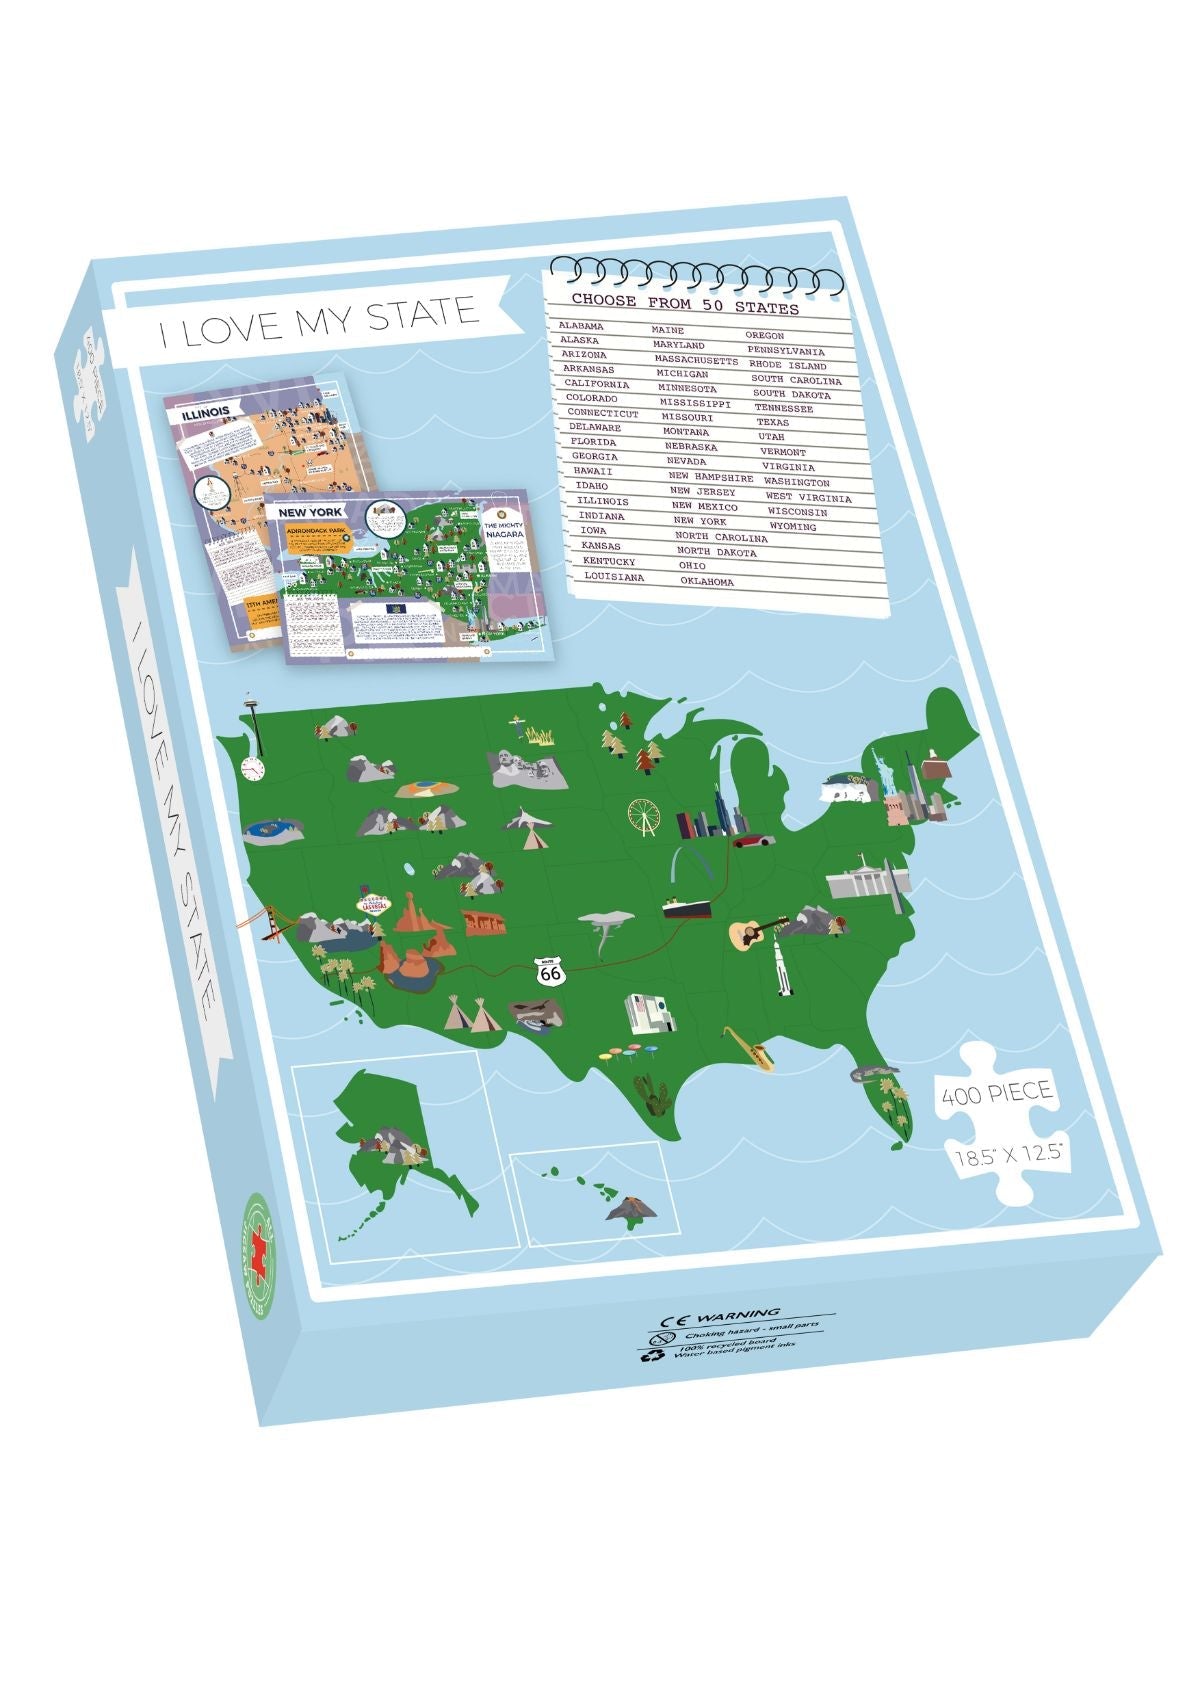 Delaware - I Love My State 400 Piece Personalized Jigsaw Puzzle